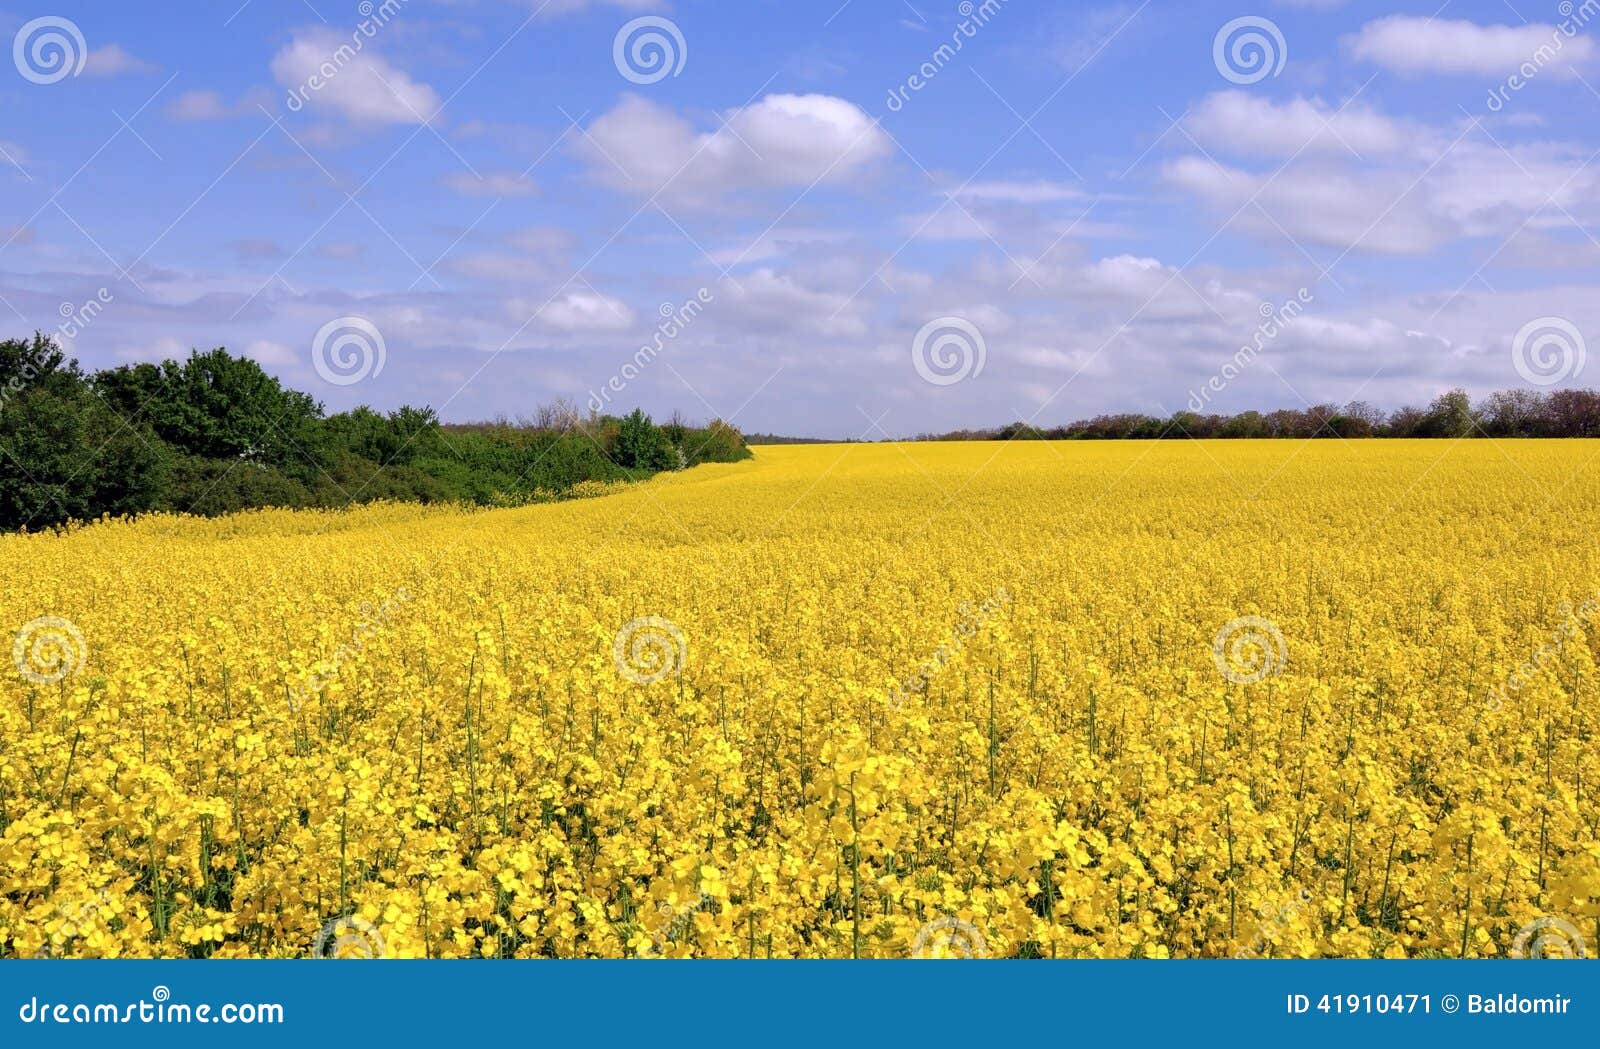 blooming canola fields